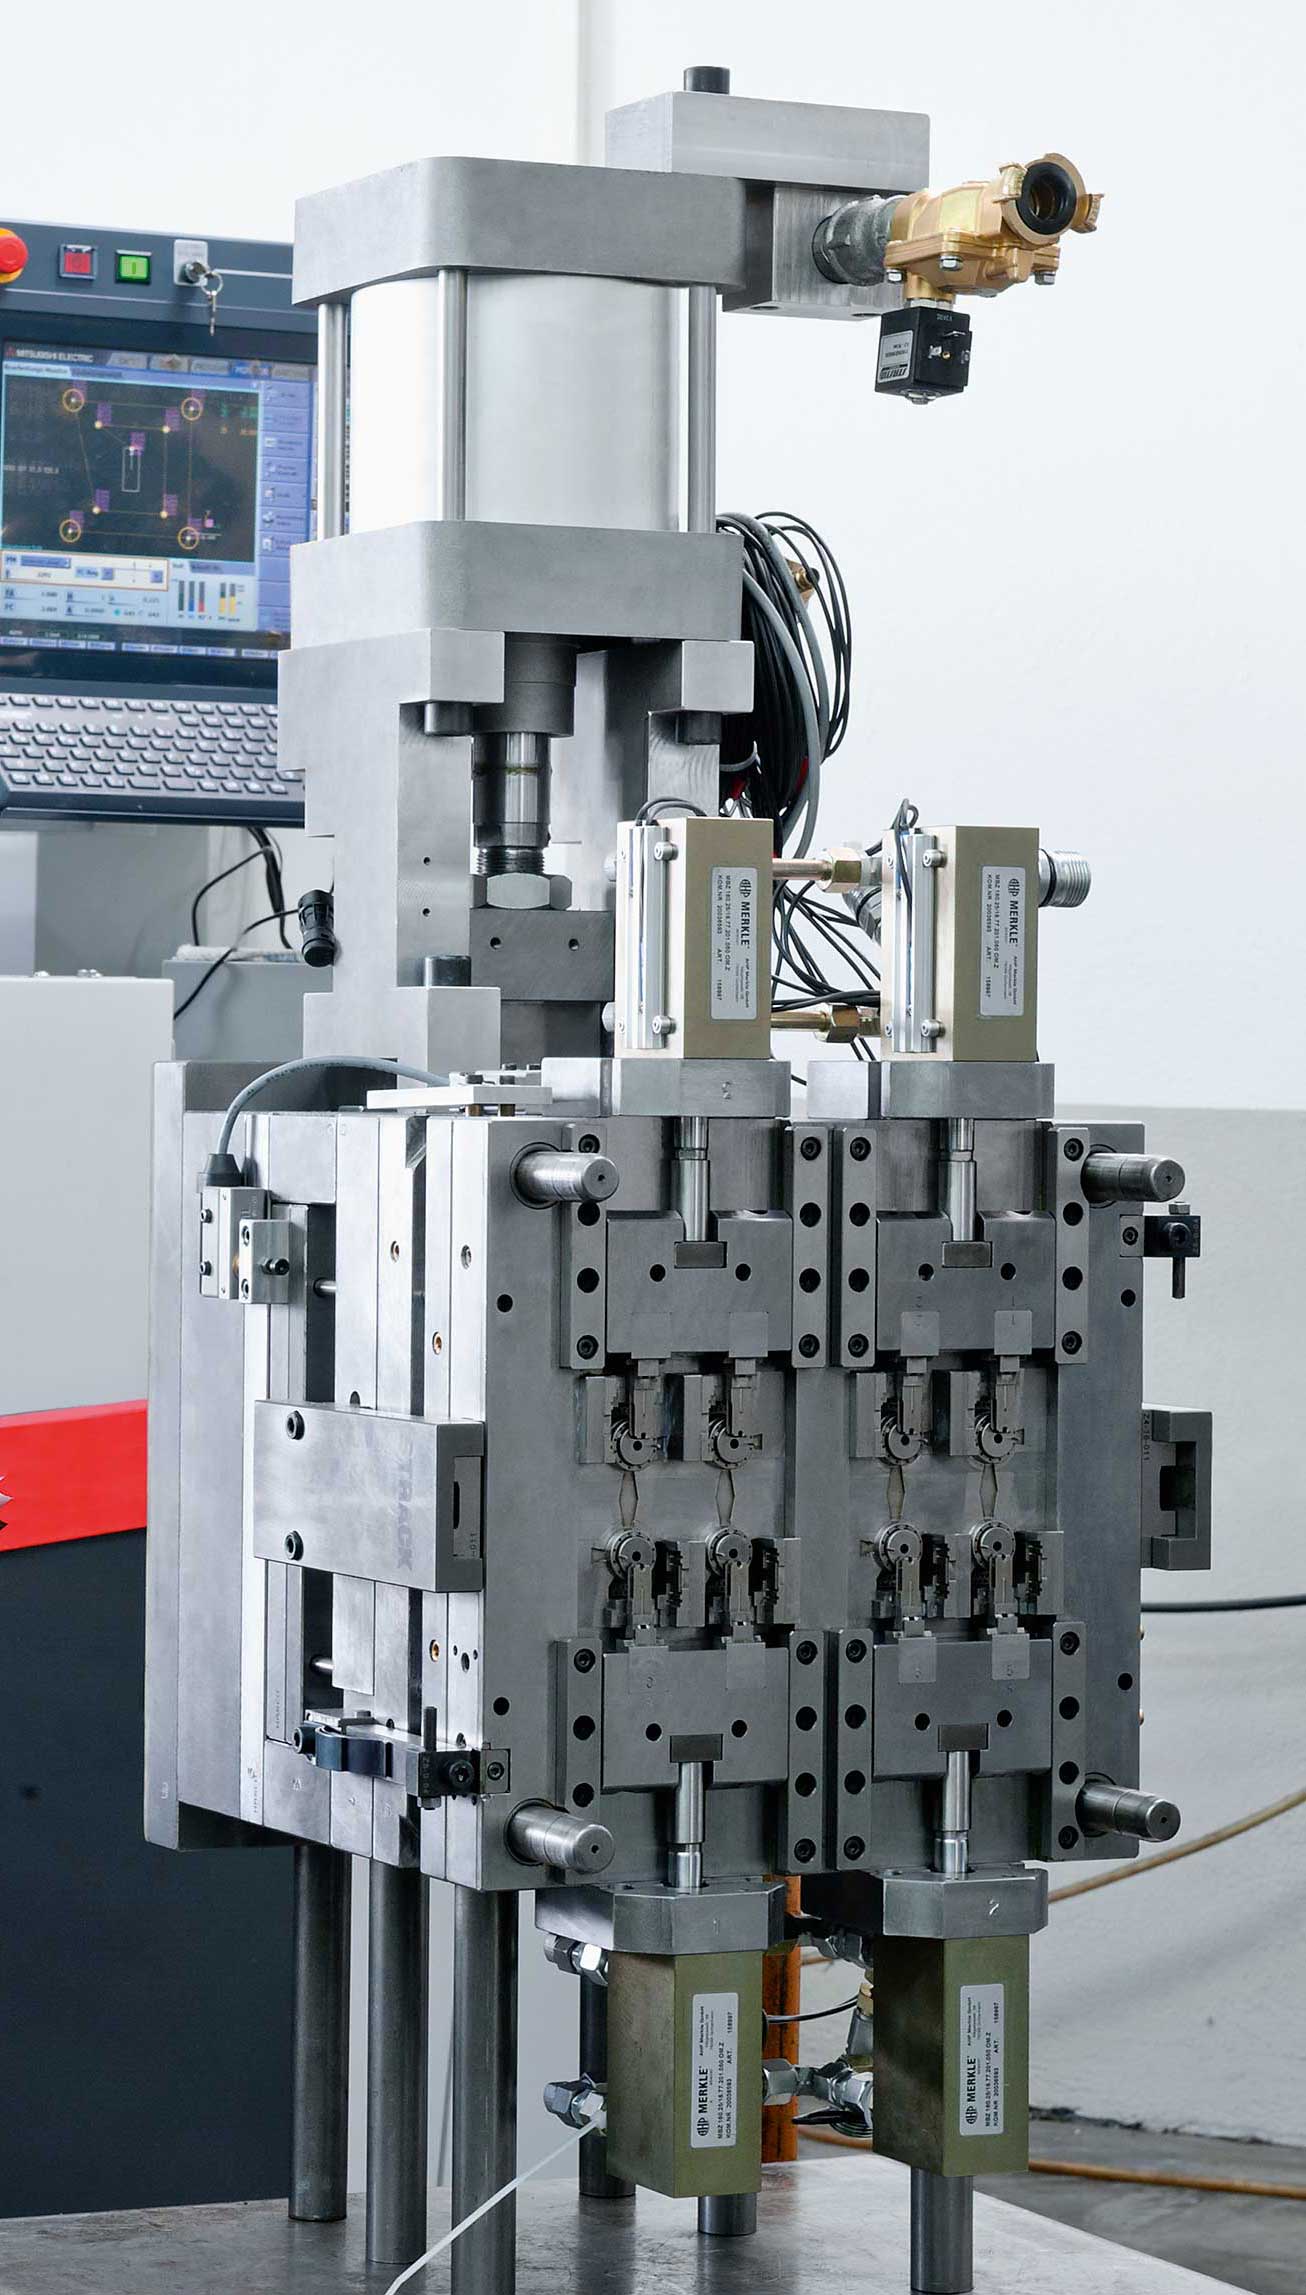 The development of what are often highly complex injection moulds is one of the core competences of Roming Werkzeugbau GmbH.